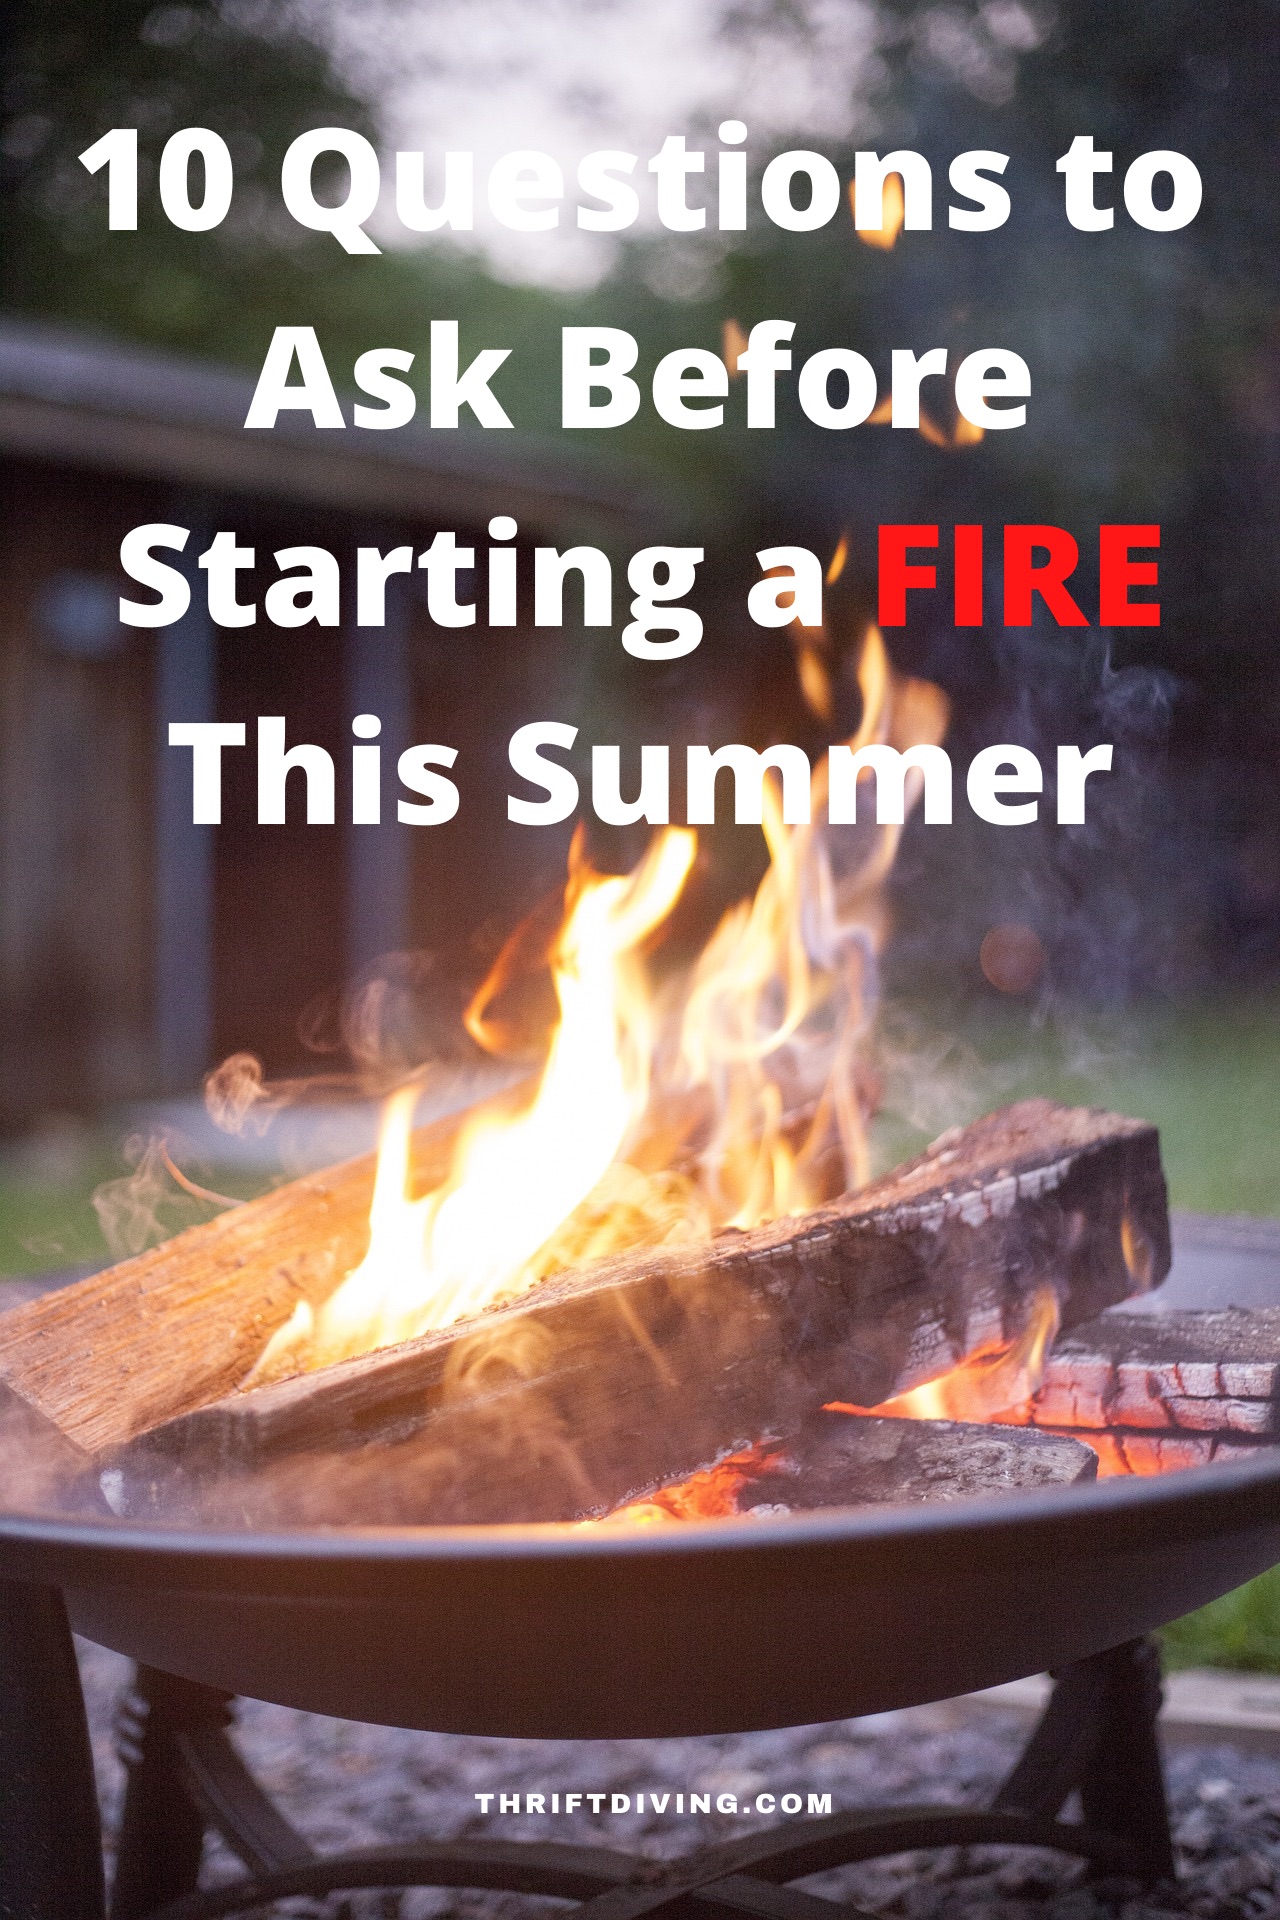 10 Questions to Ask Before Starting a FIRE This Summer - Before you pull out the marshmallows and veggie burgers, ask yourself these 10 important questions to make sure you're ready to SAFELY start a fire in your backyard! - Thrift Diving